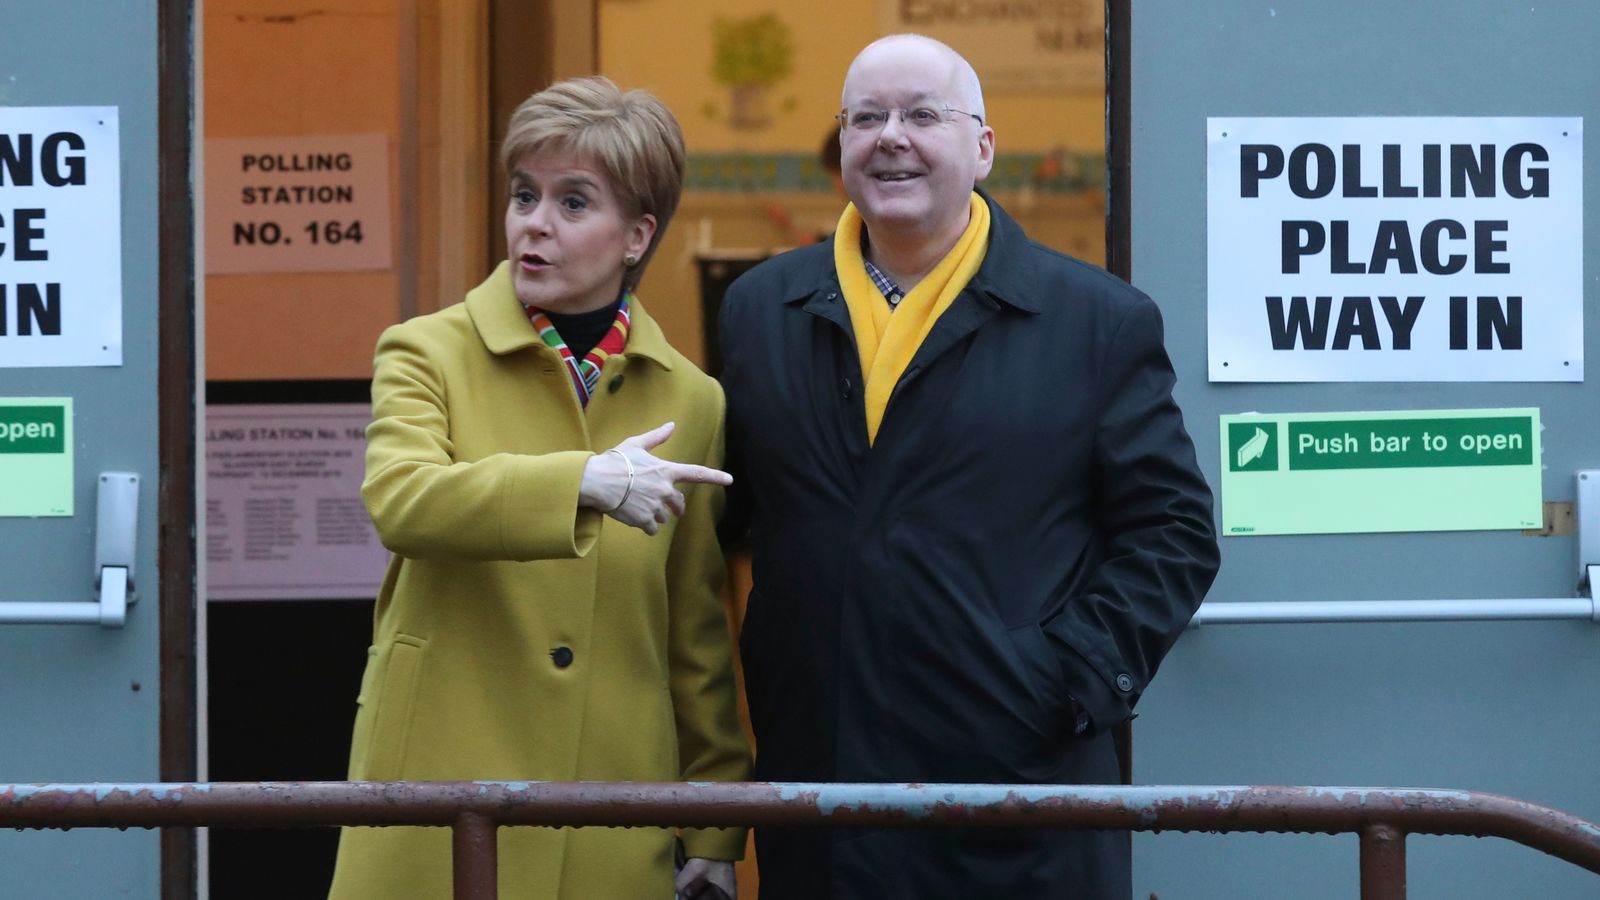 Nicola Sturgeon pulls out of Edinburgh climate change event after husband Peter Murrell's arrest in SNP finance probe